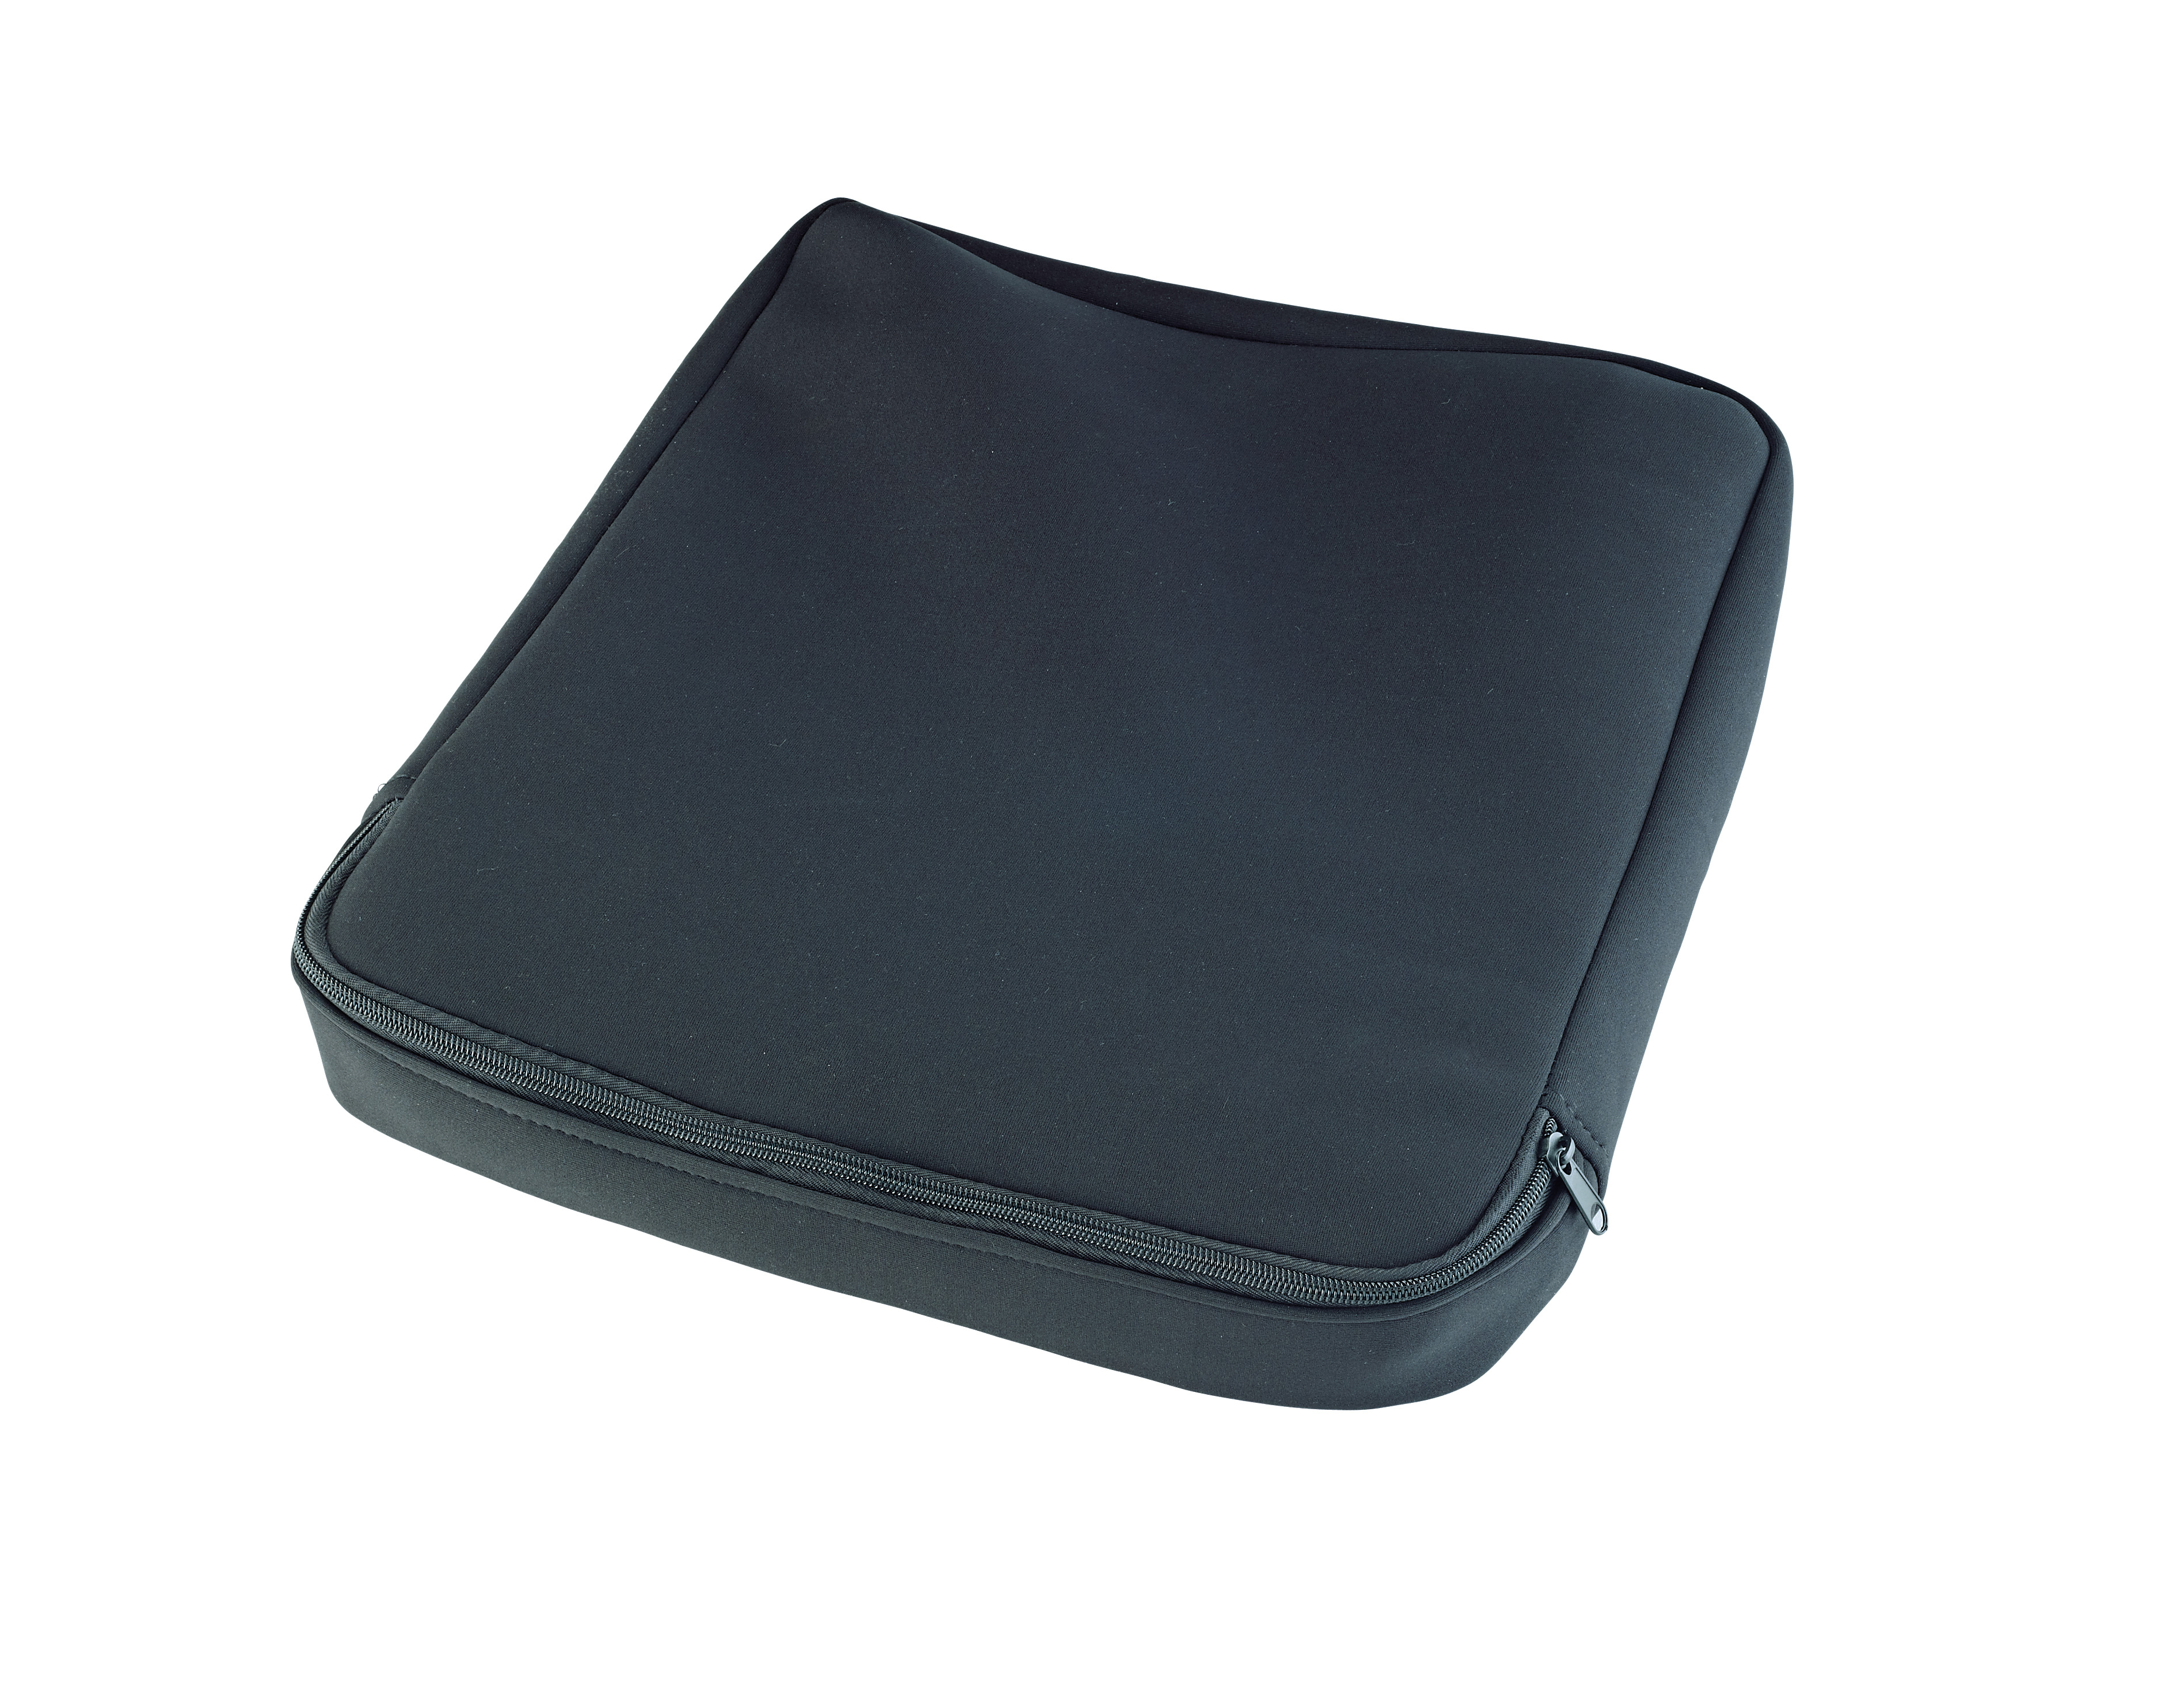 K&M 12199 Carrying case for laptop table stand